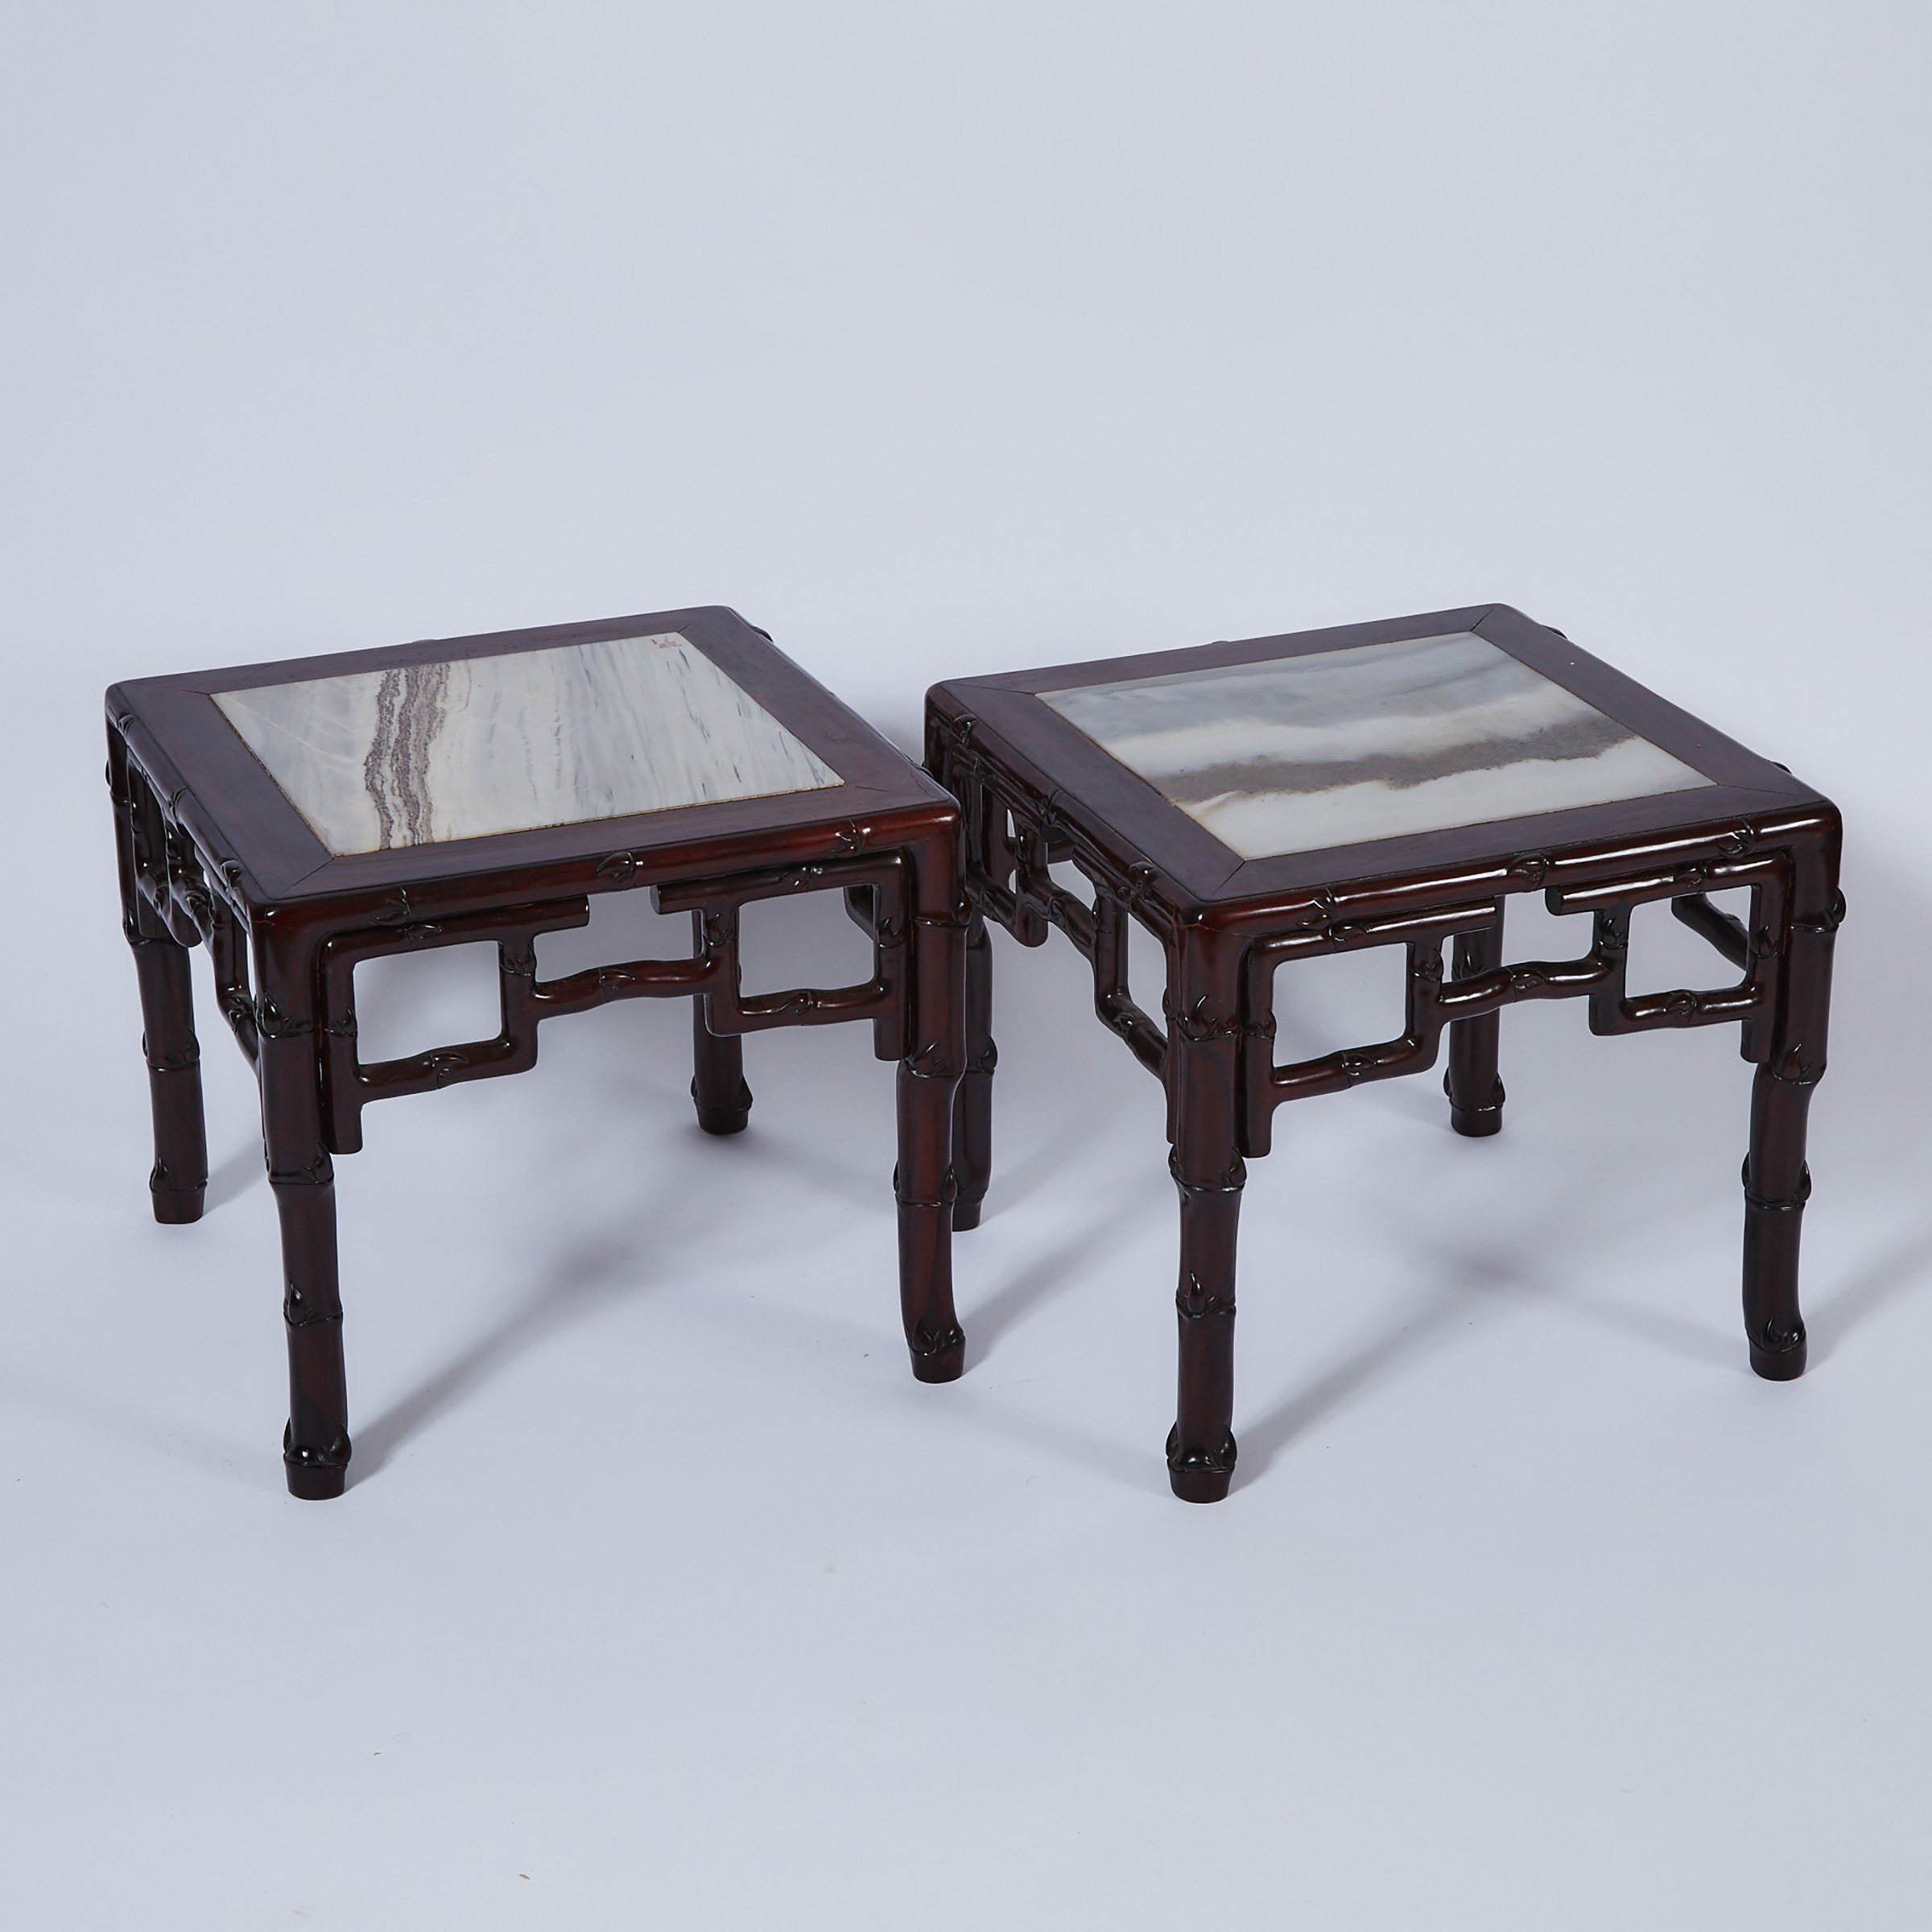 A Pair of Marble-Inlaid ‘Imitation Bamboo’ Tables, 19th Century